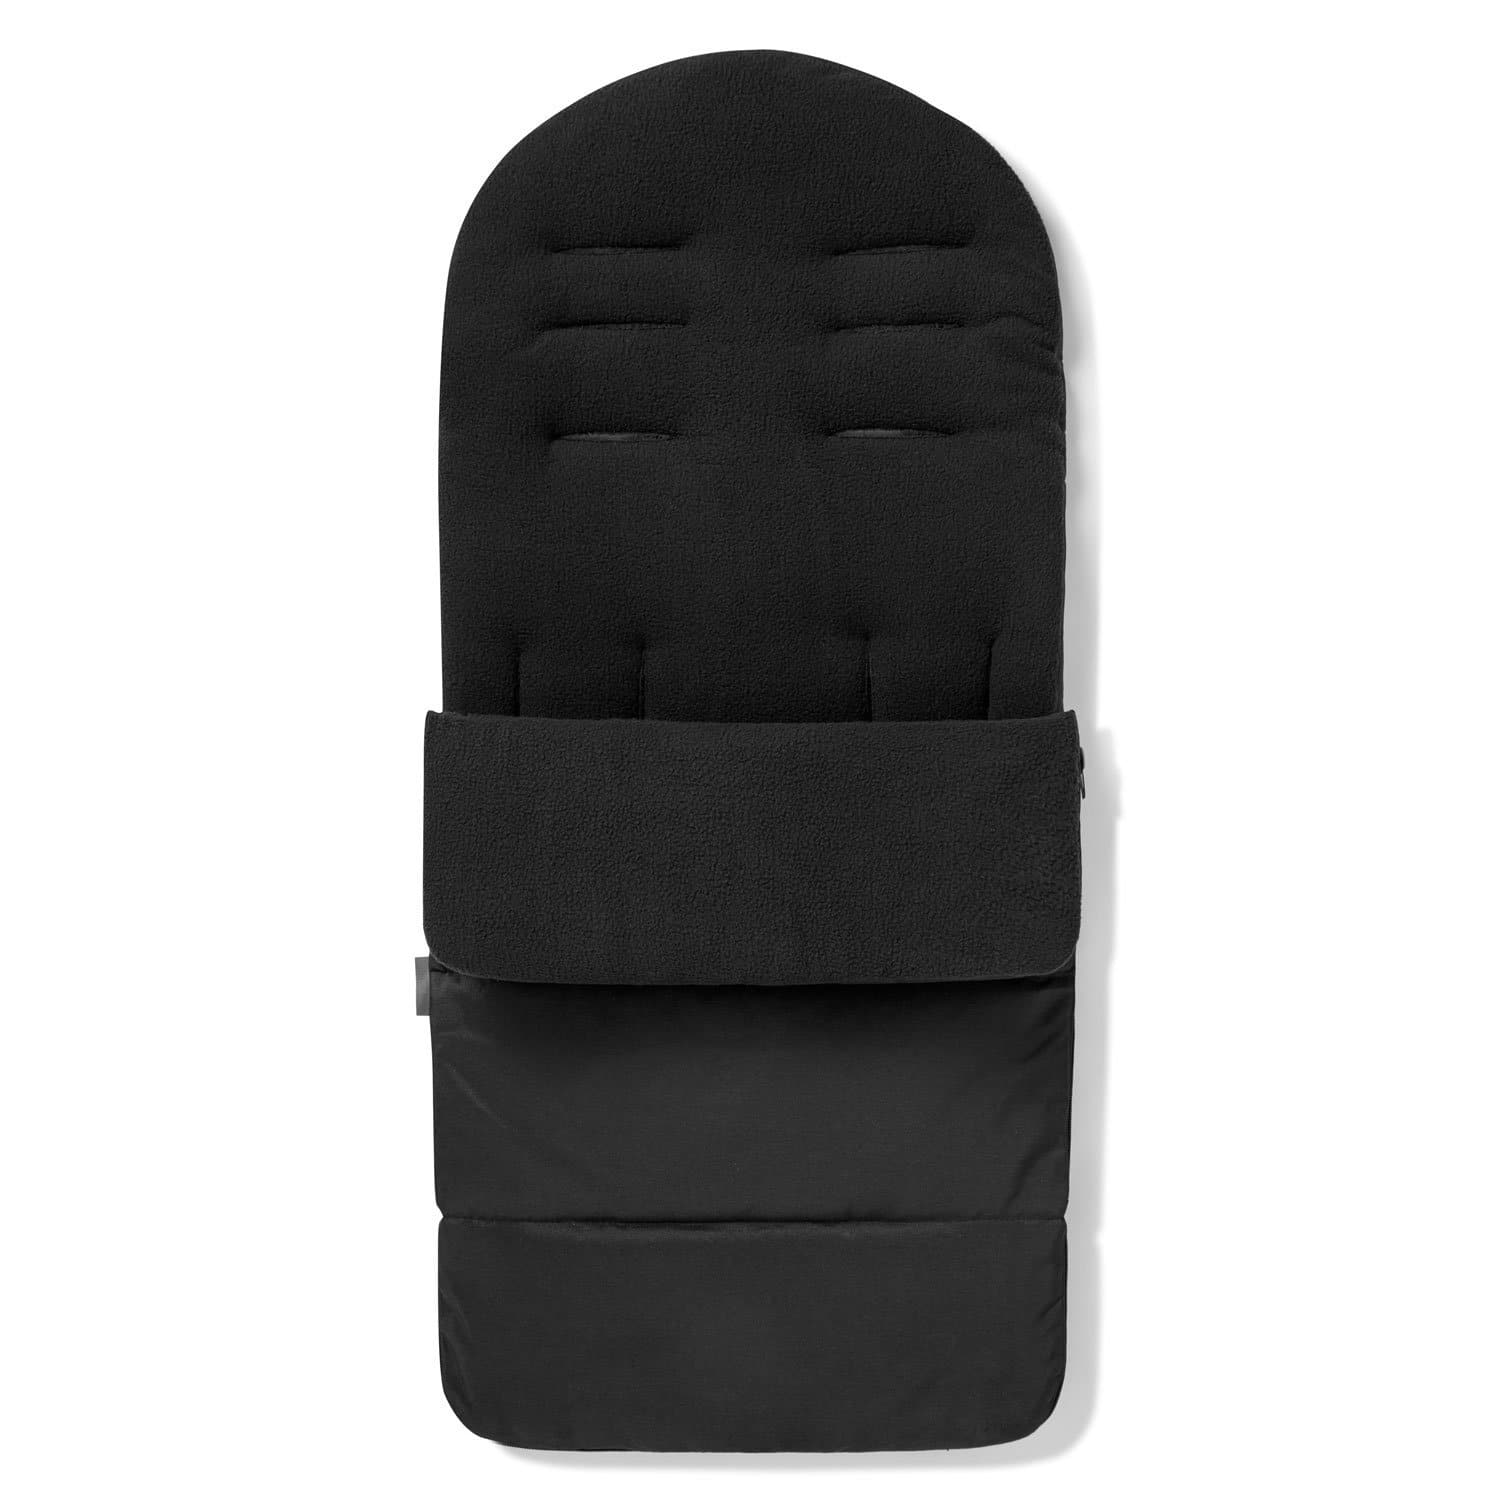 Premium Footmuff / Cosy Toes Compatible with Tutti Bambini - Black Jack / Fits All Models | For Your Little One